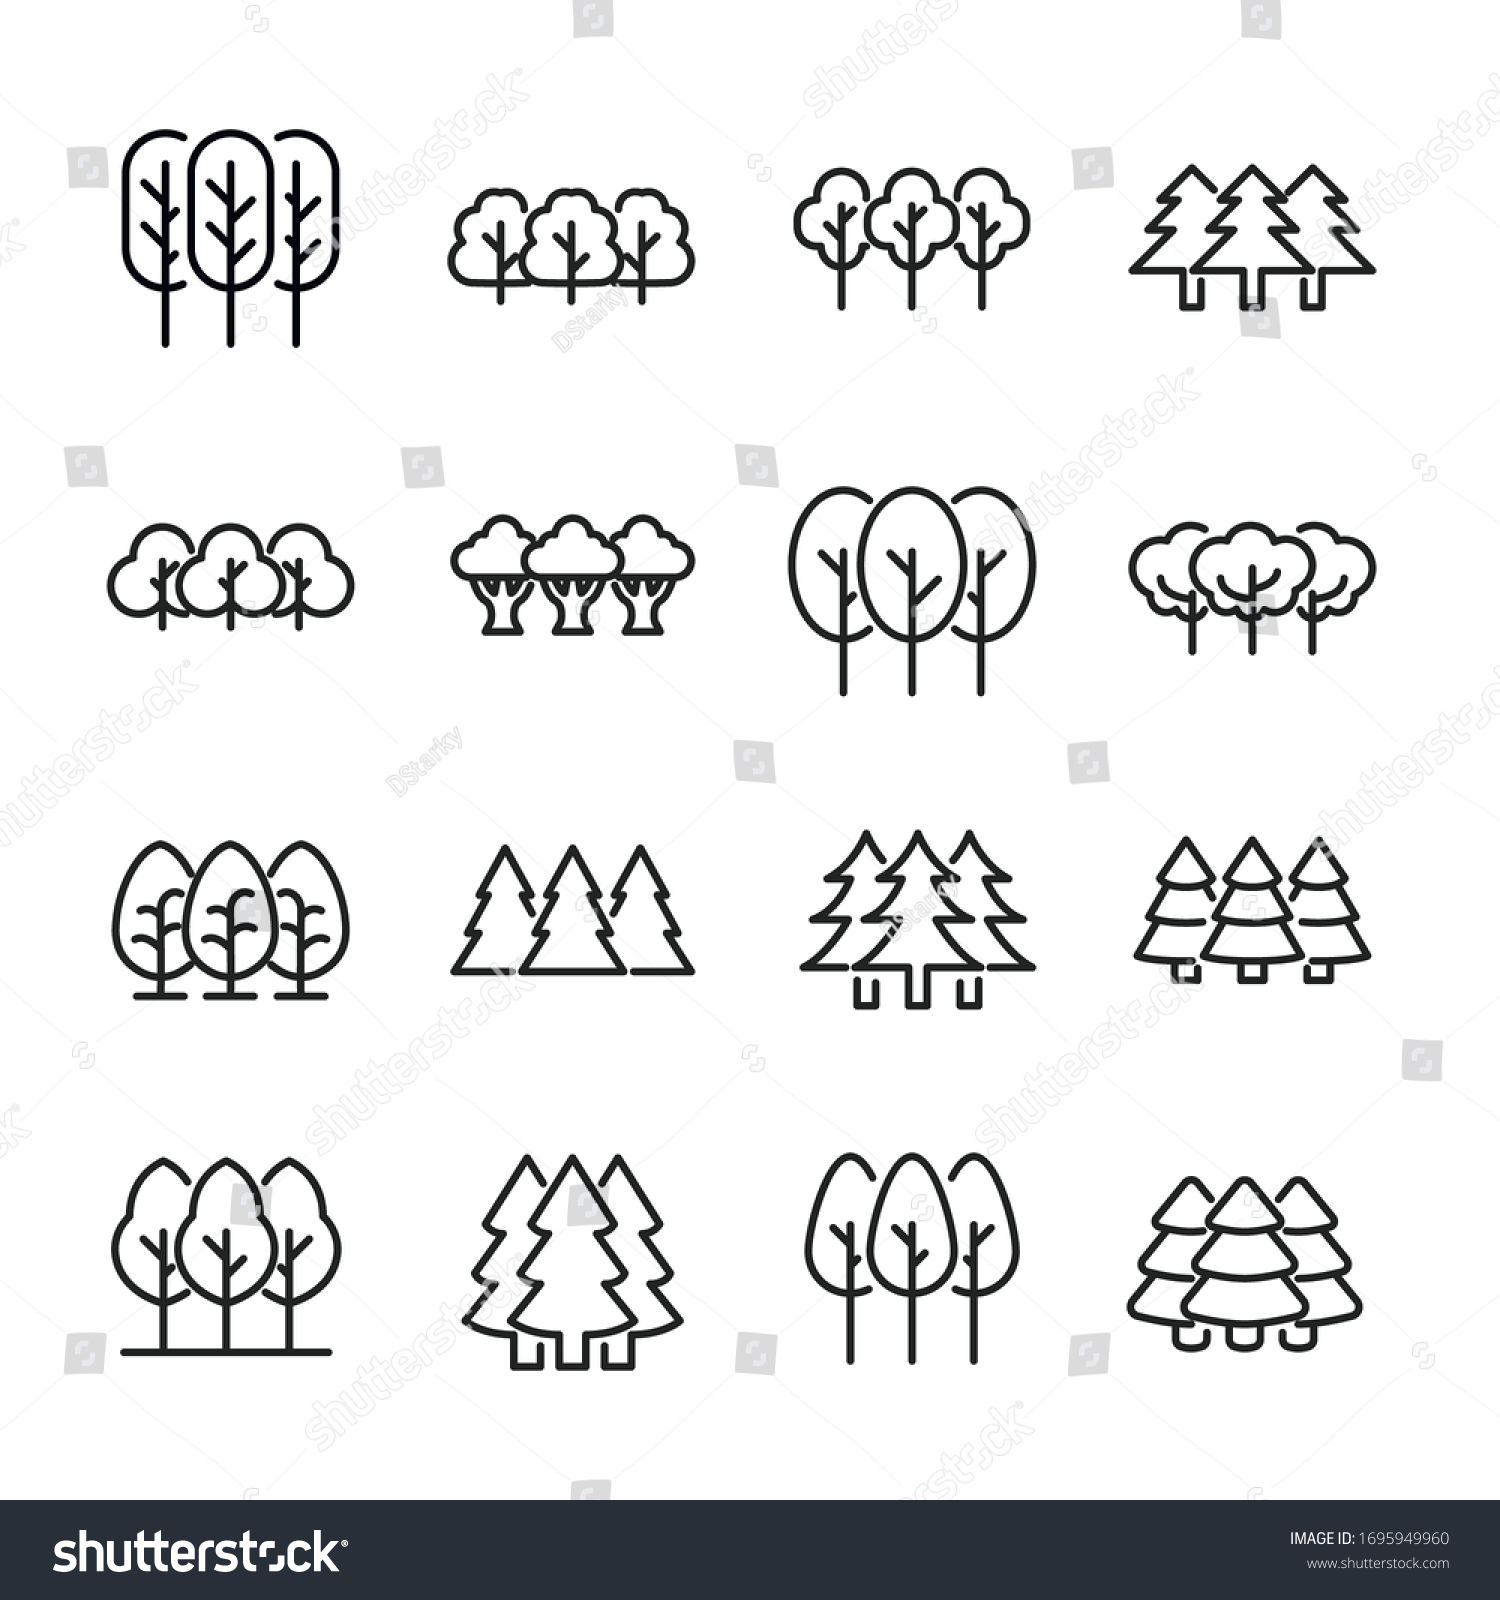 SVG of Modern thin line icons set of forest. Premium quality symbols. Simple pictograms for web sites and mobile app. Vector line icons isolated on a white background. svg